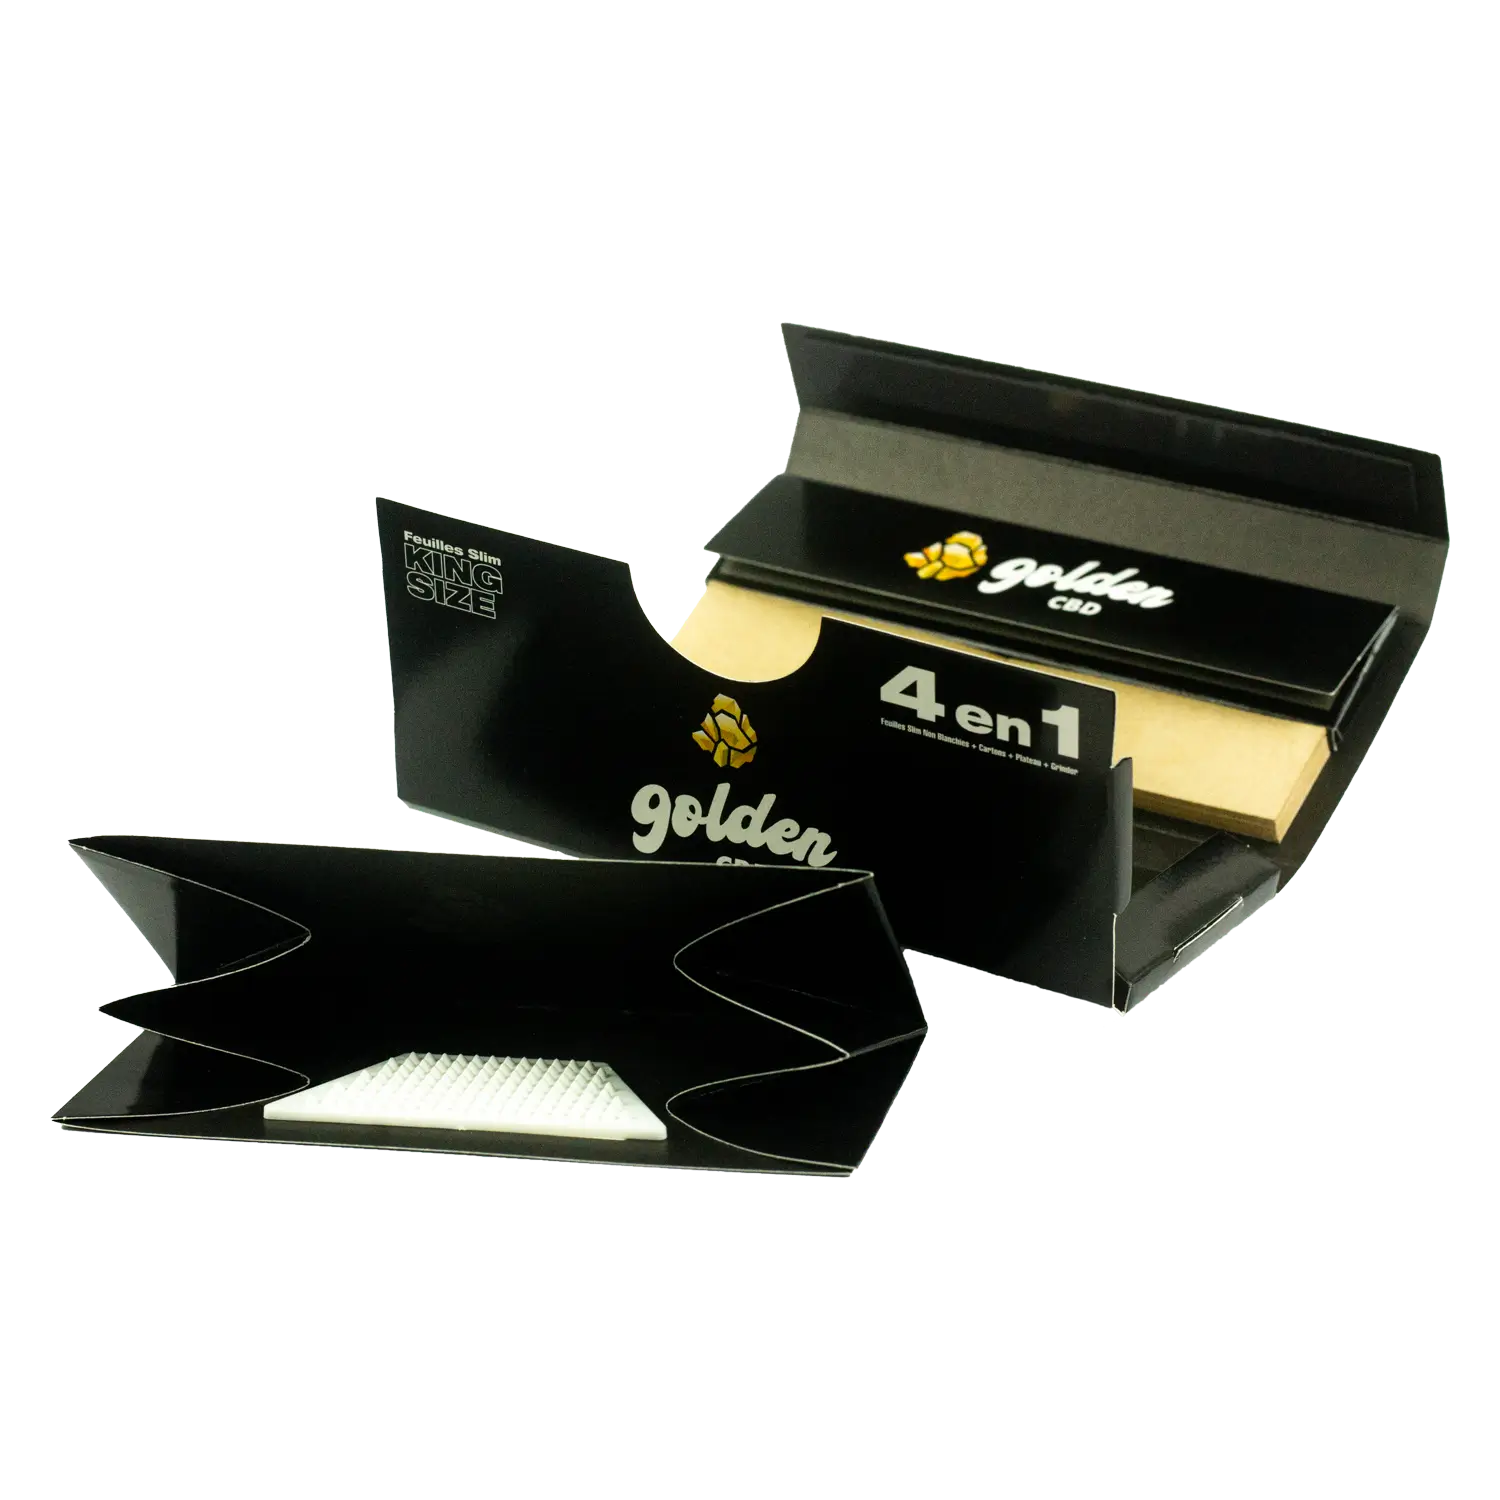 4-in-1 rolling papers